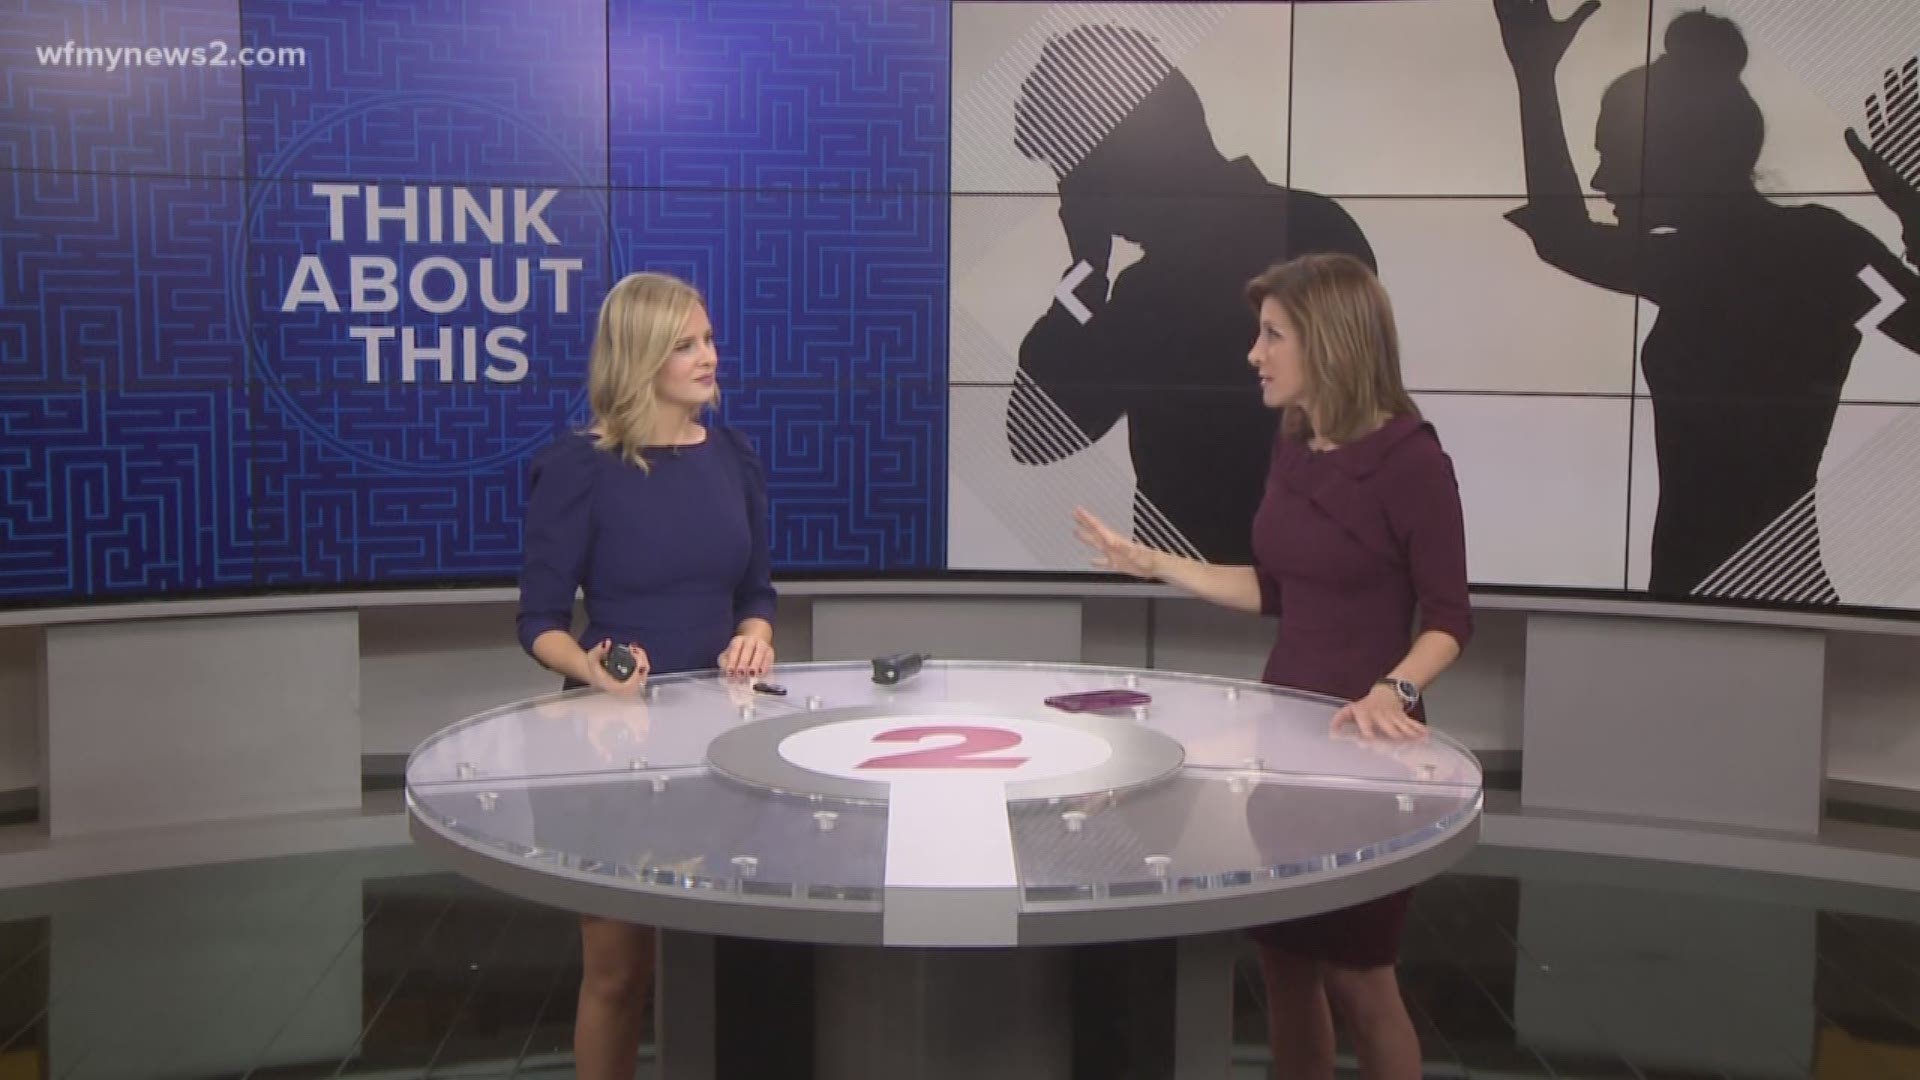 Before your teen starts dating, have a talk about dating violence. Blanca Cobb shares tips.